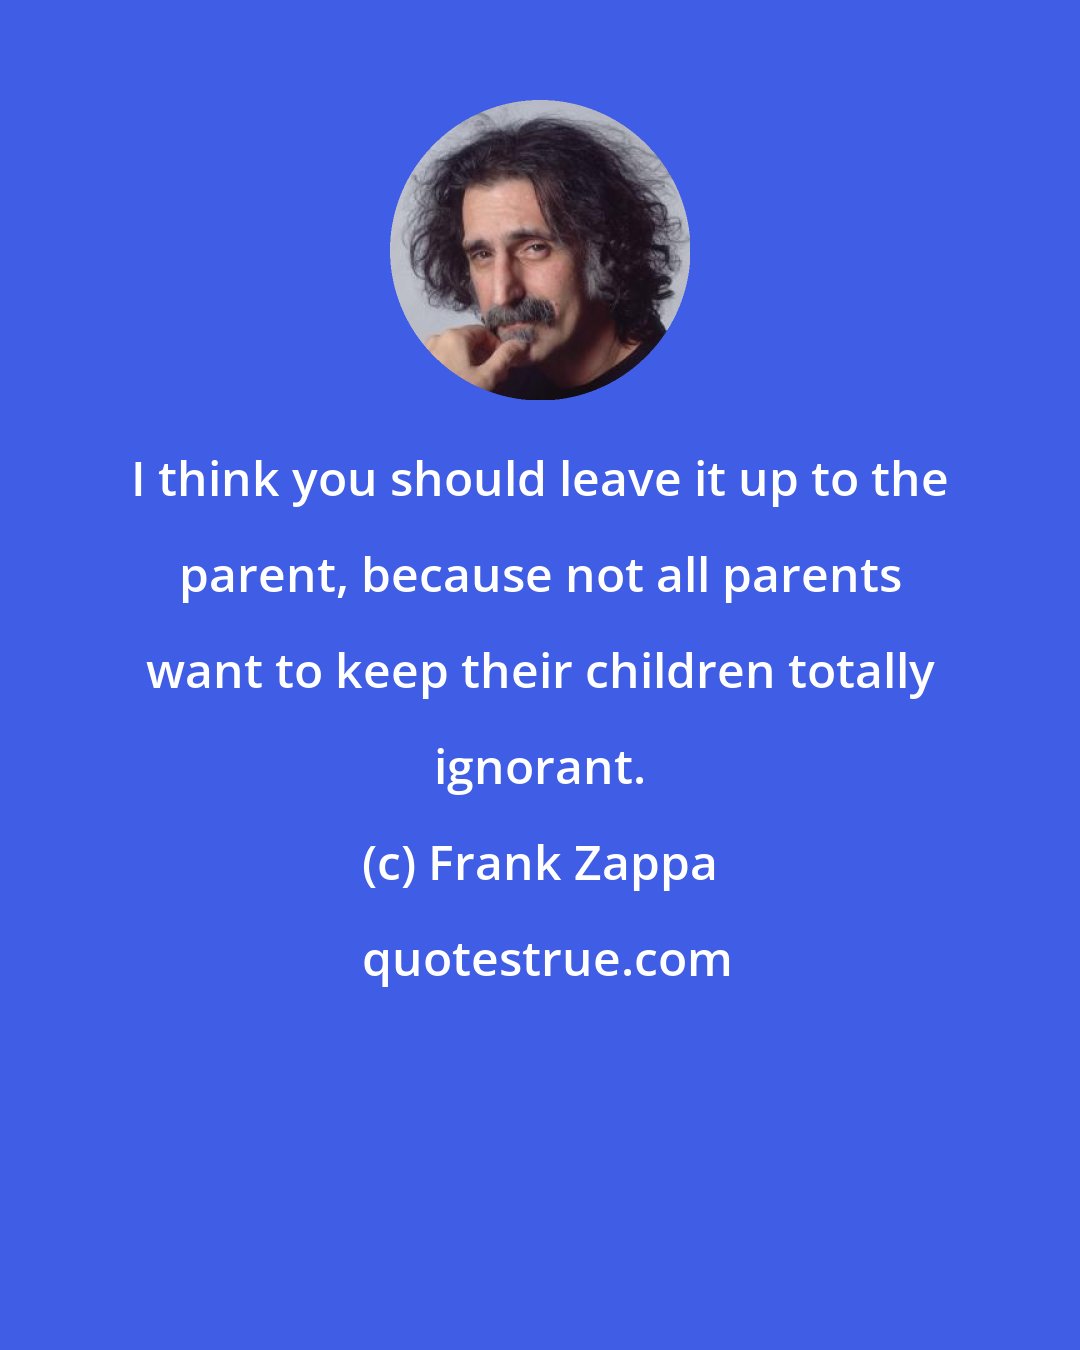 Frank Zappa: I think you should leave it up to the parent, because not all parents want to keep their children totally ignorant.